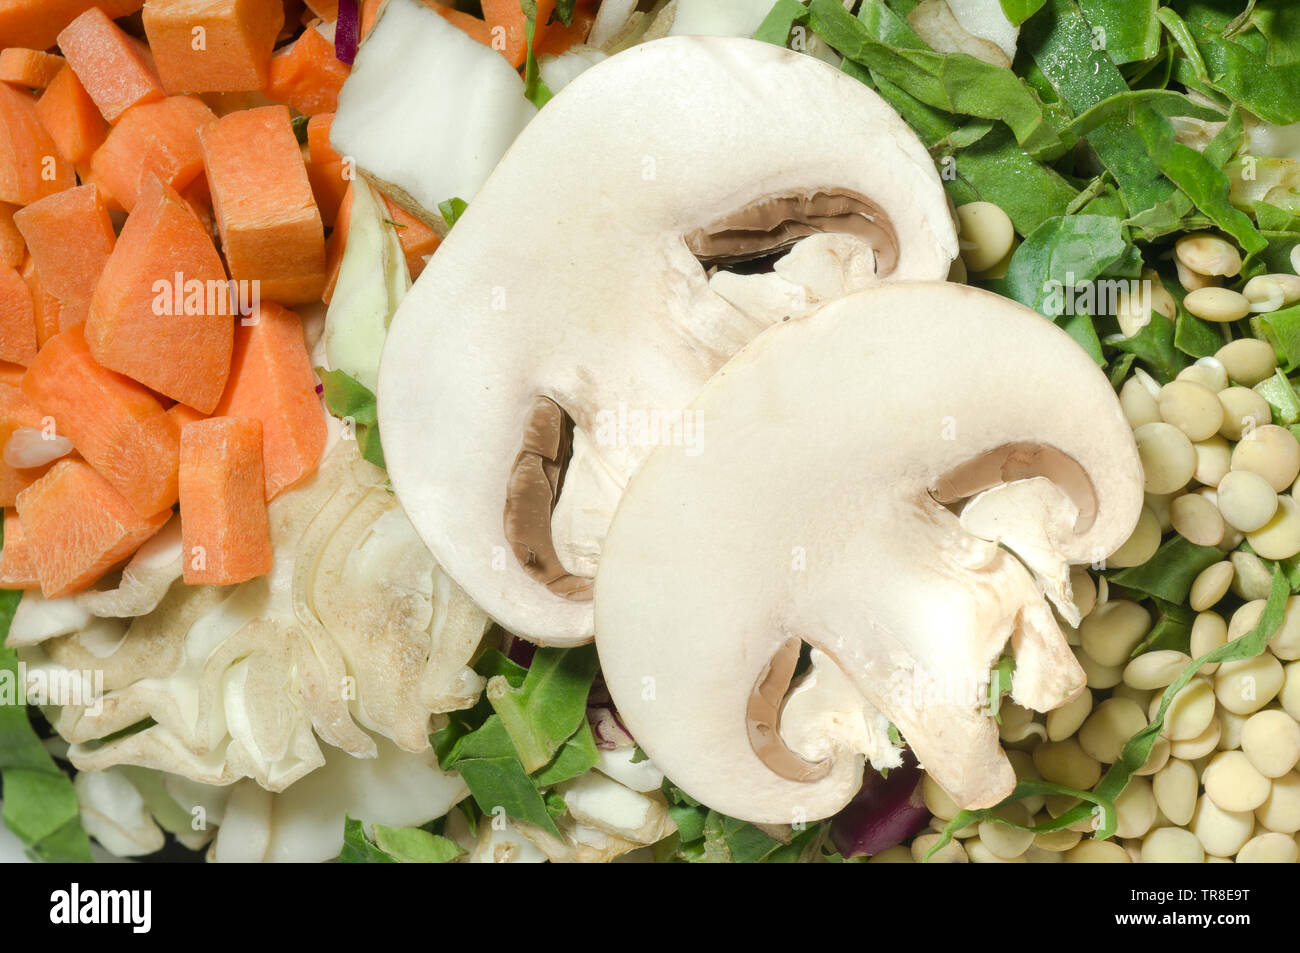 Various chopped vegetables, carrot, cabbage, lettuce, lentils, mushroom. Top view Stock Photo